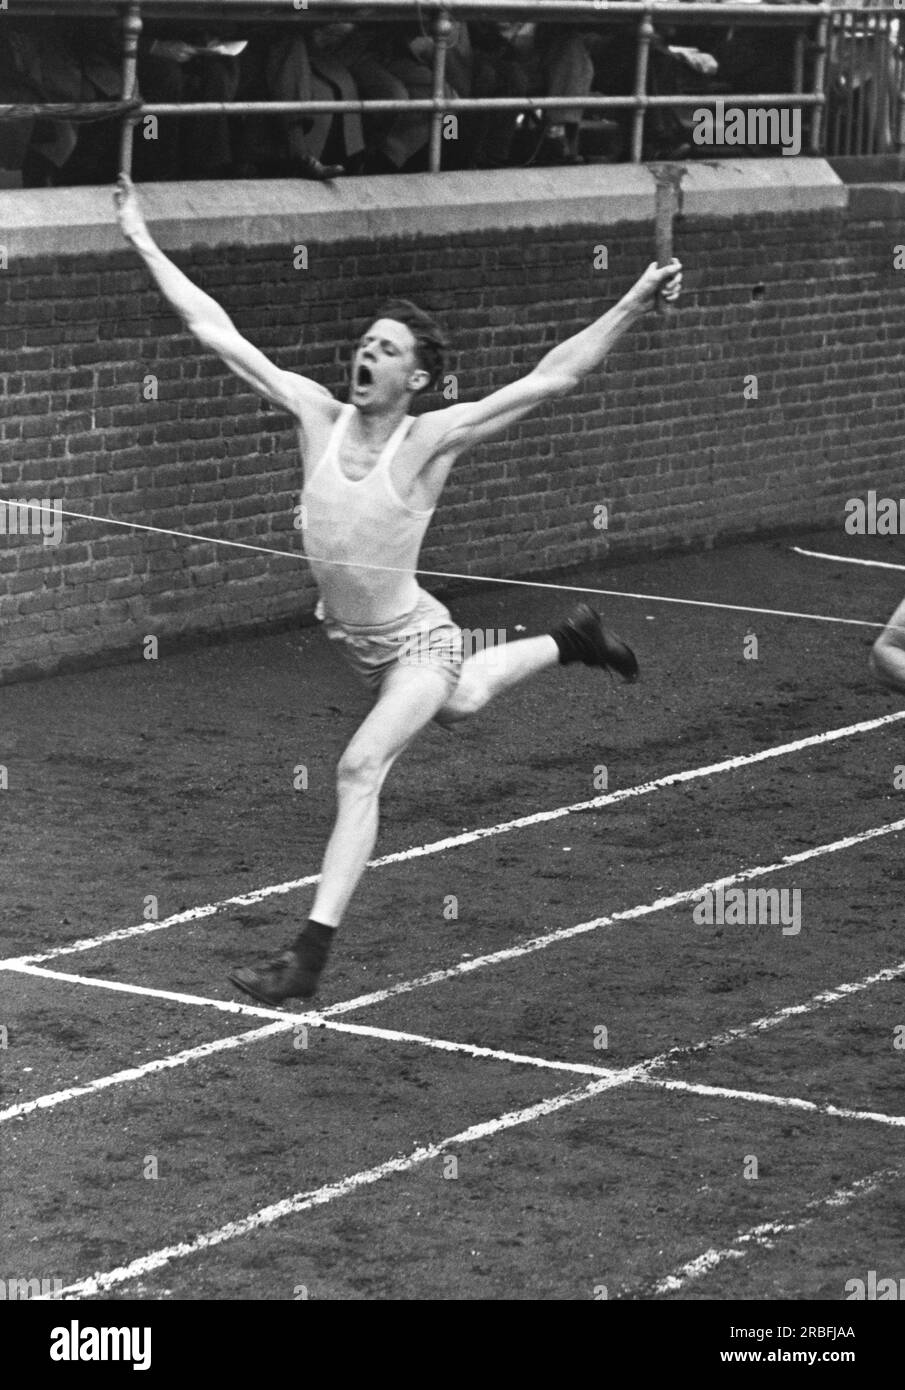 Philadelphia, Pennsylvania   1946 A runner in the relay event crosses the finish line at the Penn Relays Carnival. Stock Photo